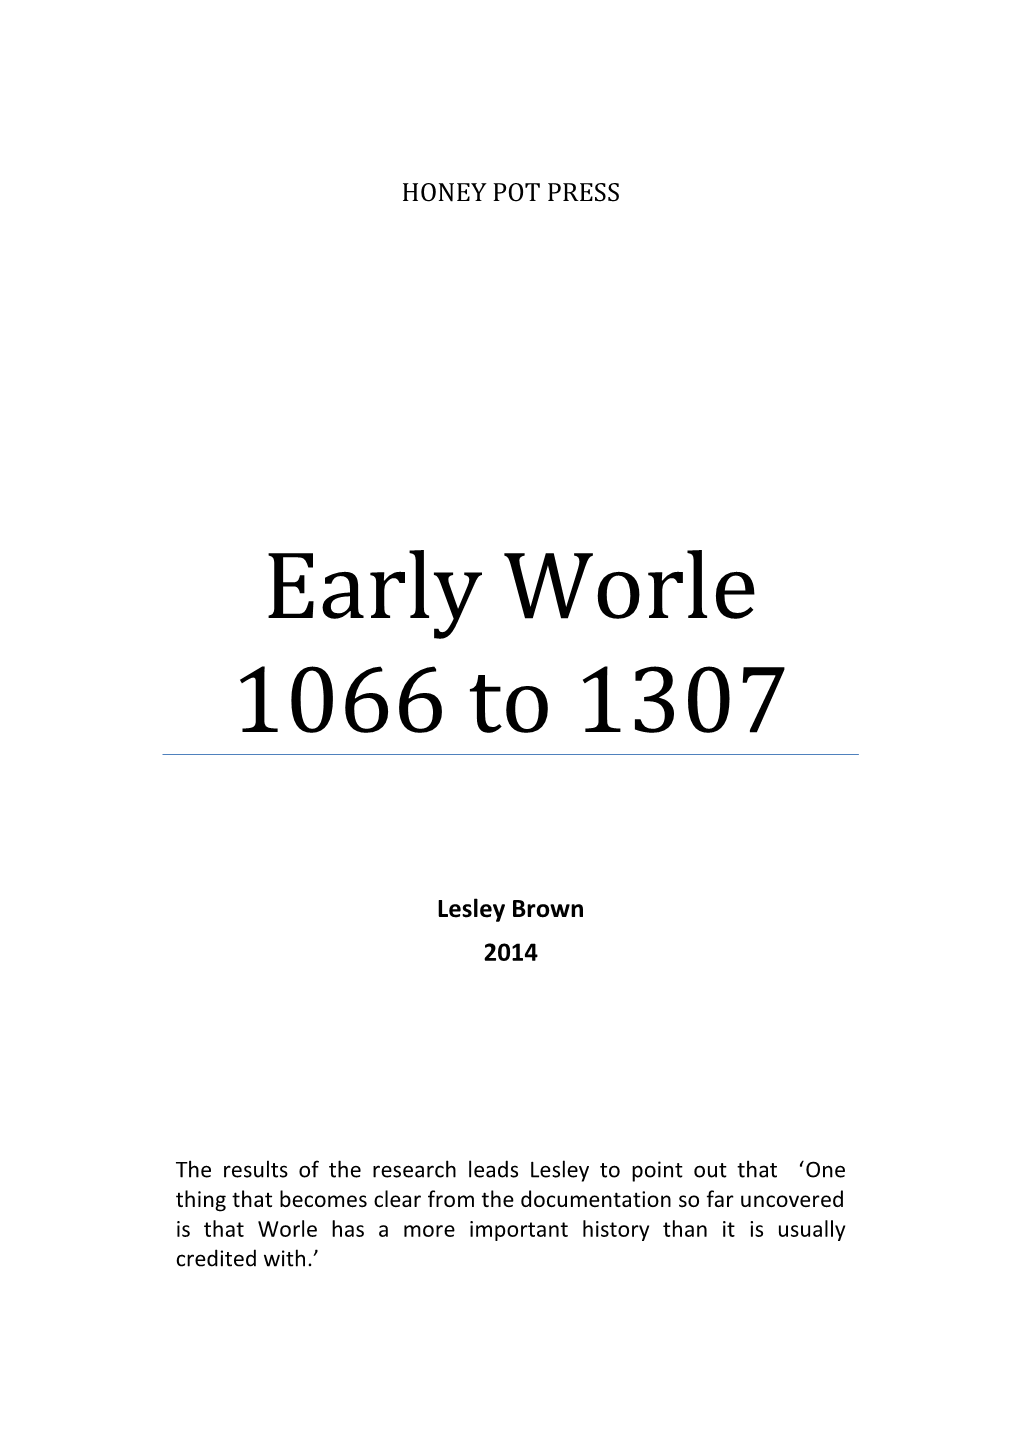 Early Worle 1066 to 1307.Pdf